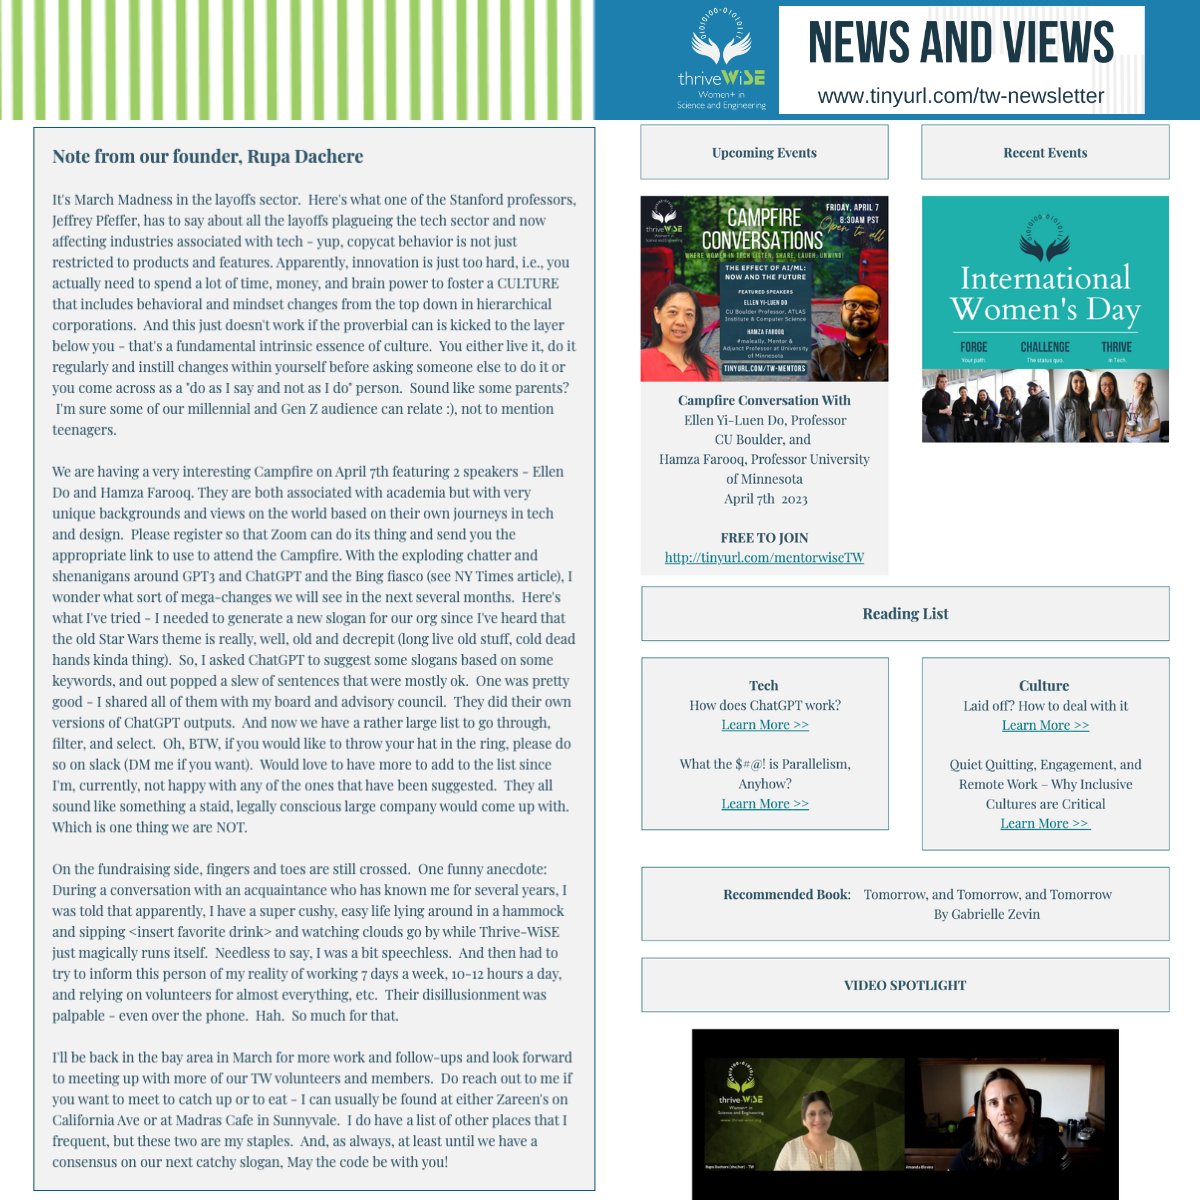 Read our March 2023 newsletter at ow.ly/8gOm50NfE2g
First Campfire in April 2023, ChatGPT, Coping with Layoffs, Jeffrey Pfeffer, and more.

#thrive-wise #womeninscience #womeninengineer #global #nonprofit